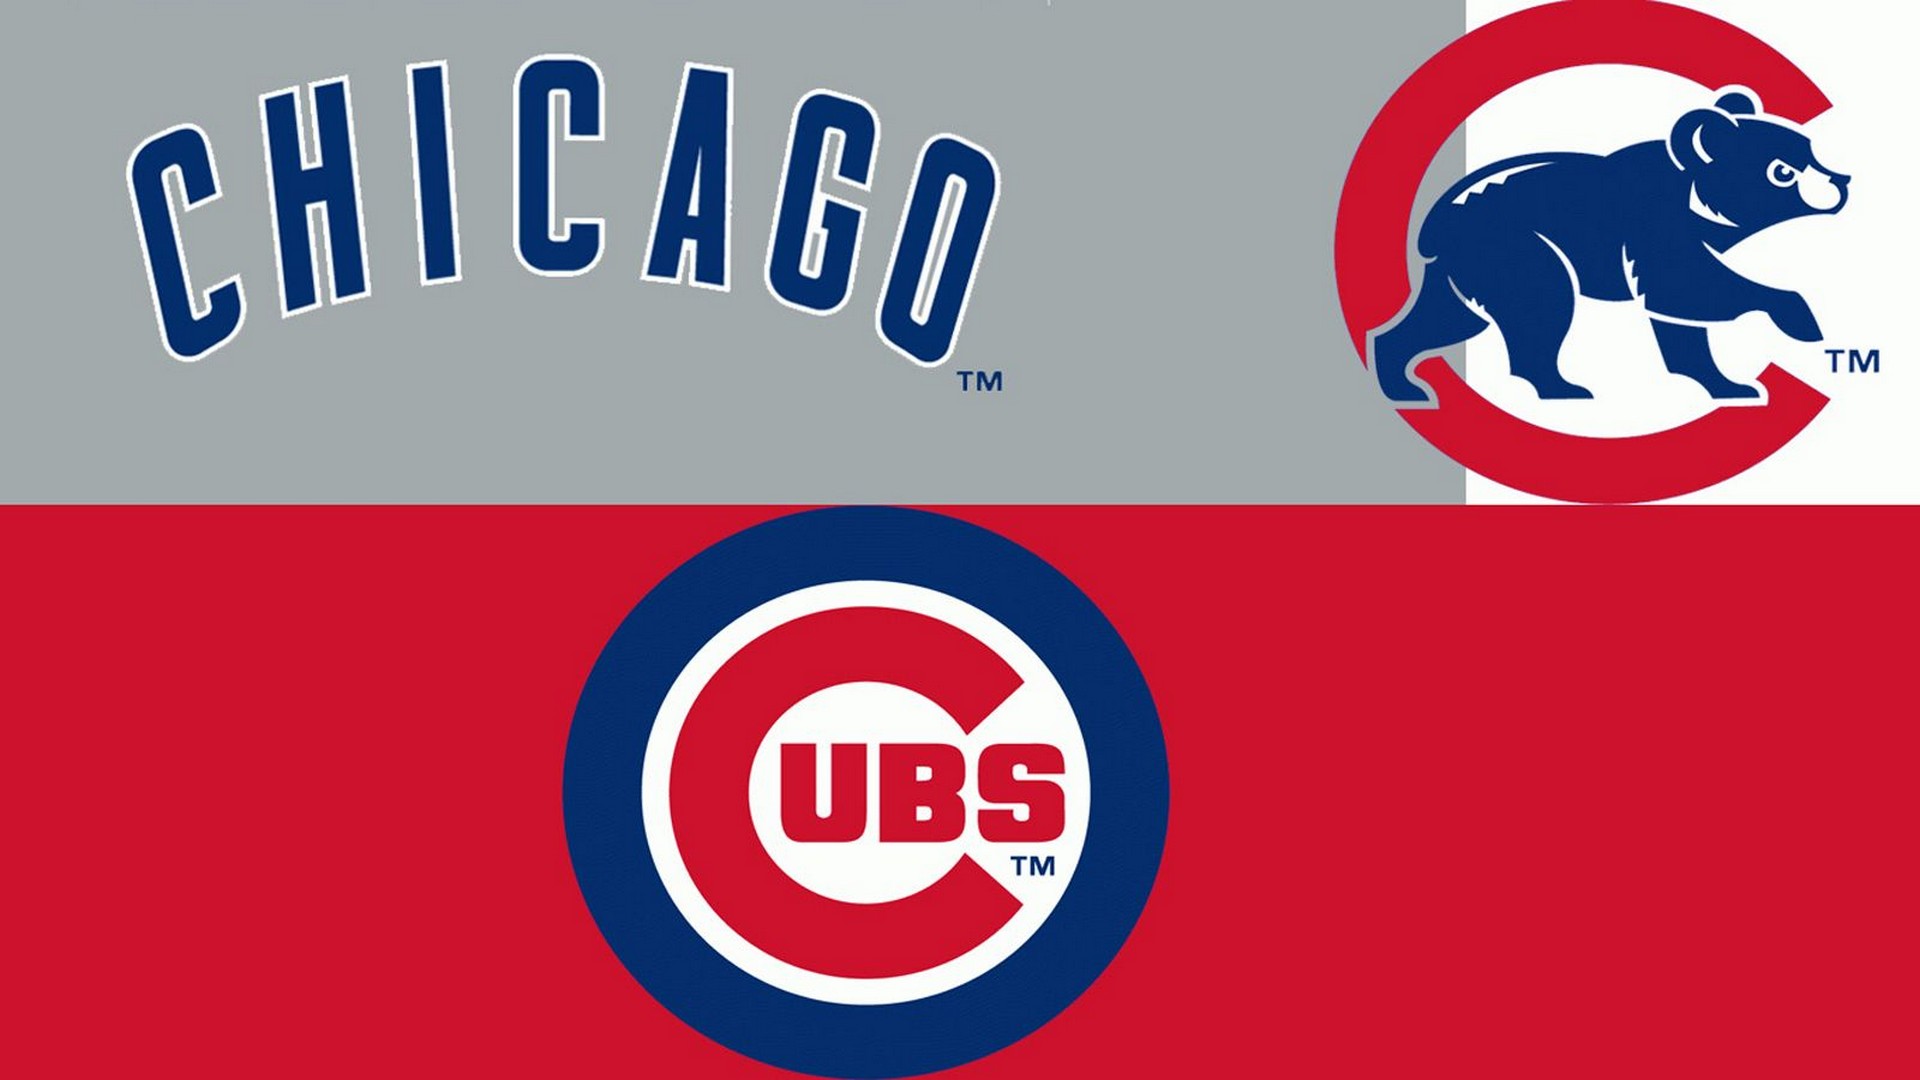 Chicago Cubs MLB HD Wallpapers with high-resolution 1920x1080 pixel. You can use this wallpaper for Mac Desktop Wallpaper, Laptop Screensavers, Android Wallpapers, Tablet or iPhone Home Screen and another mobile phone device